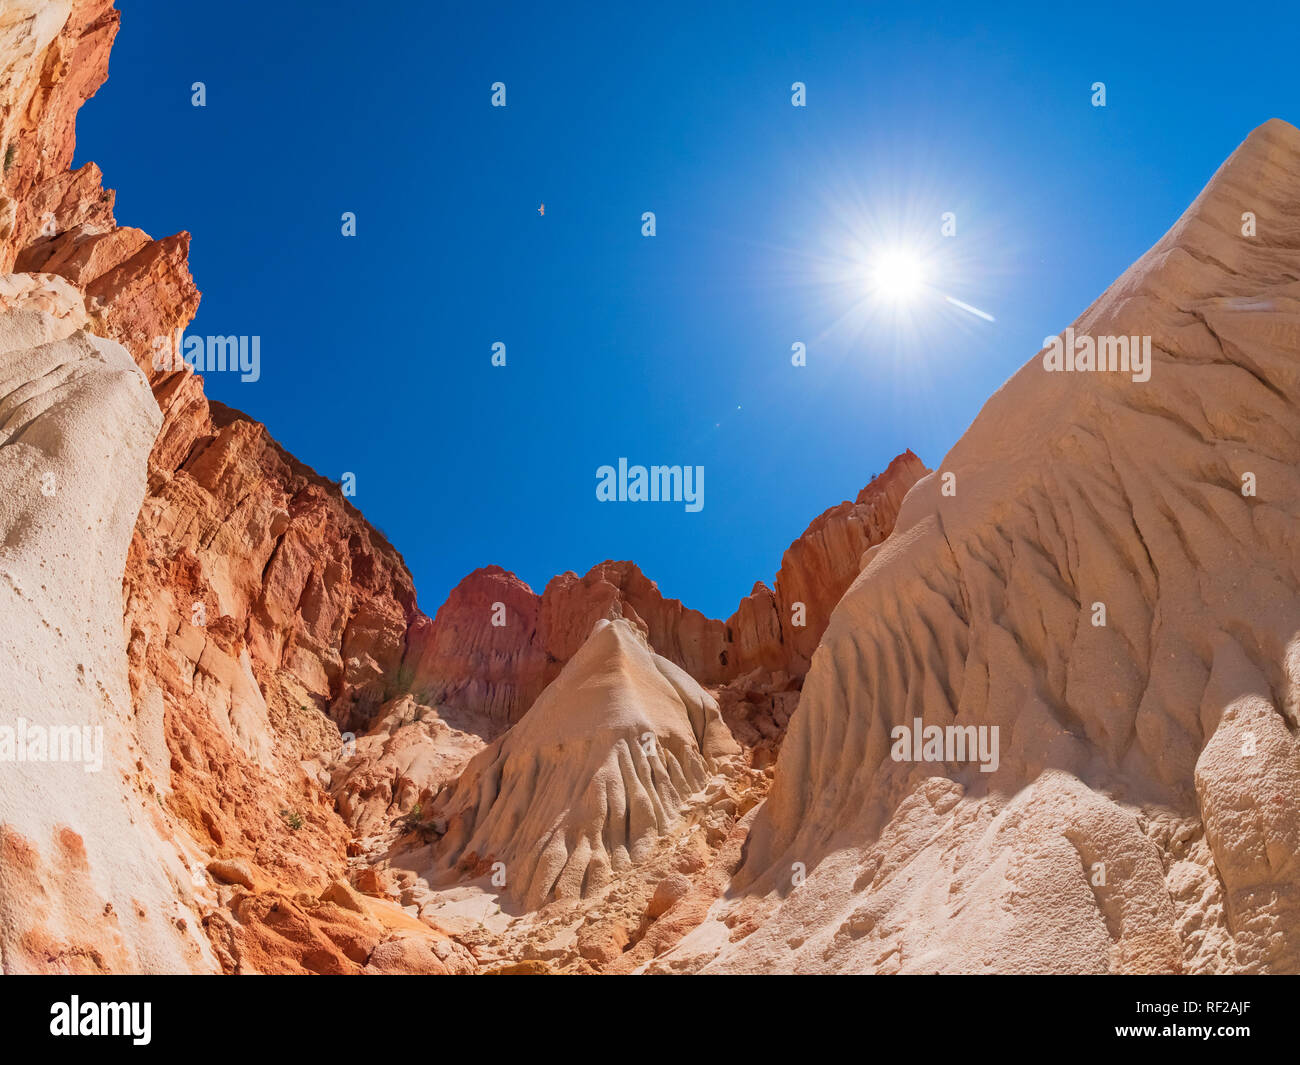 Portugal, Algarve, rock formations against the sun Stock Photo